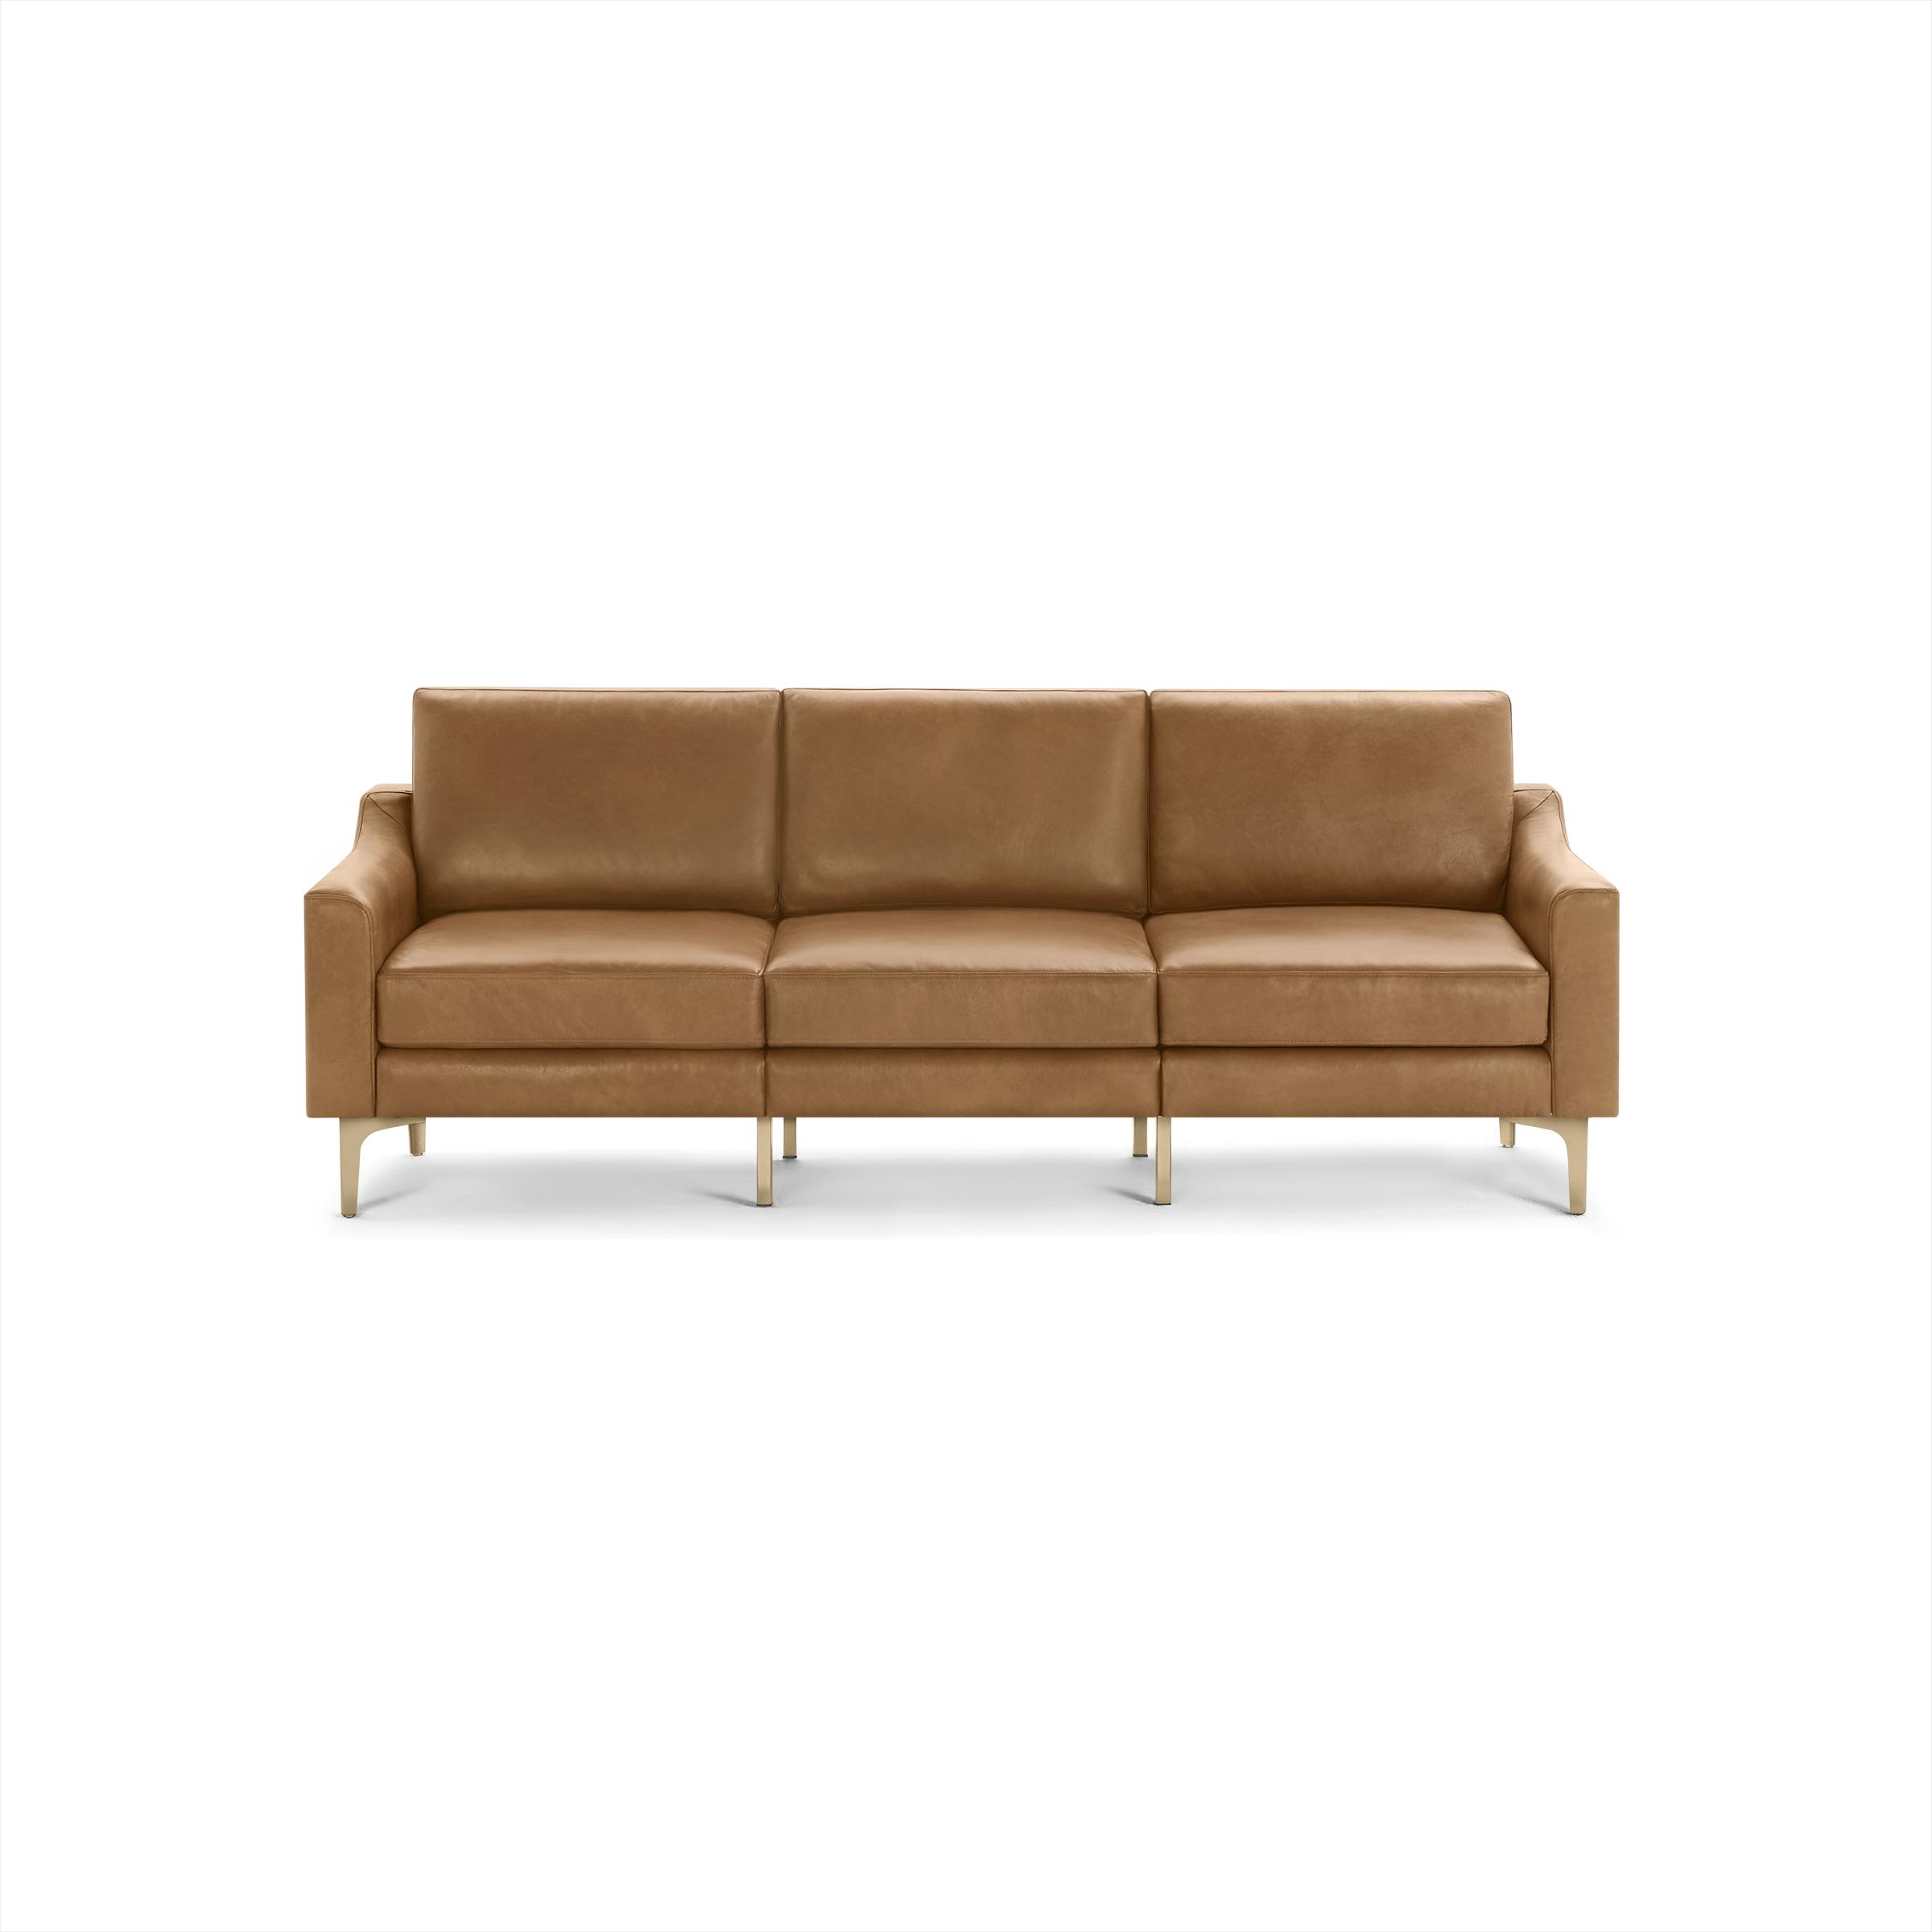 Nomad Leather Sofa in Camel, Brass Legs - Image 0